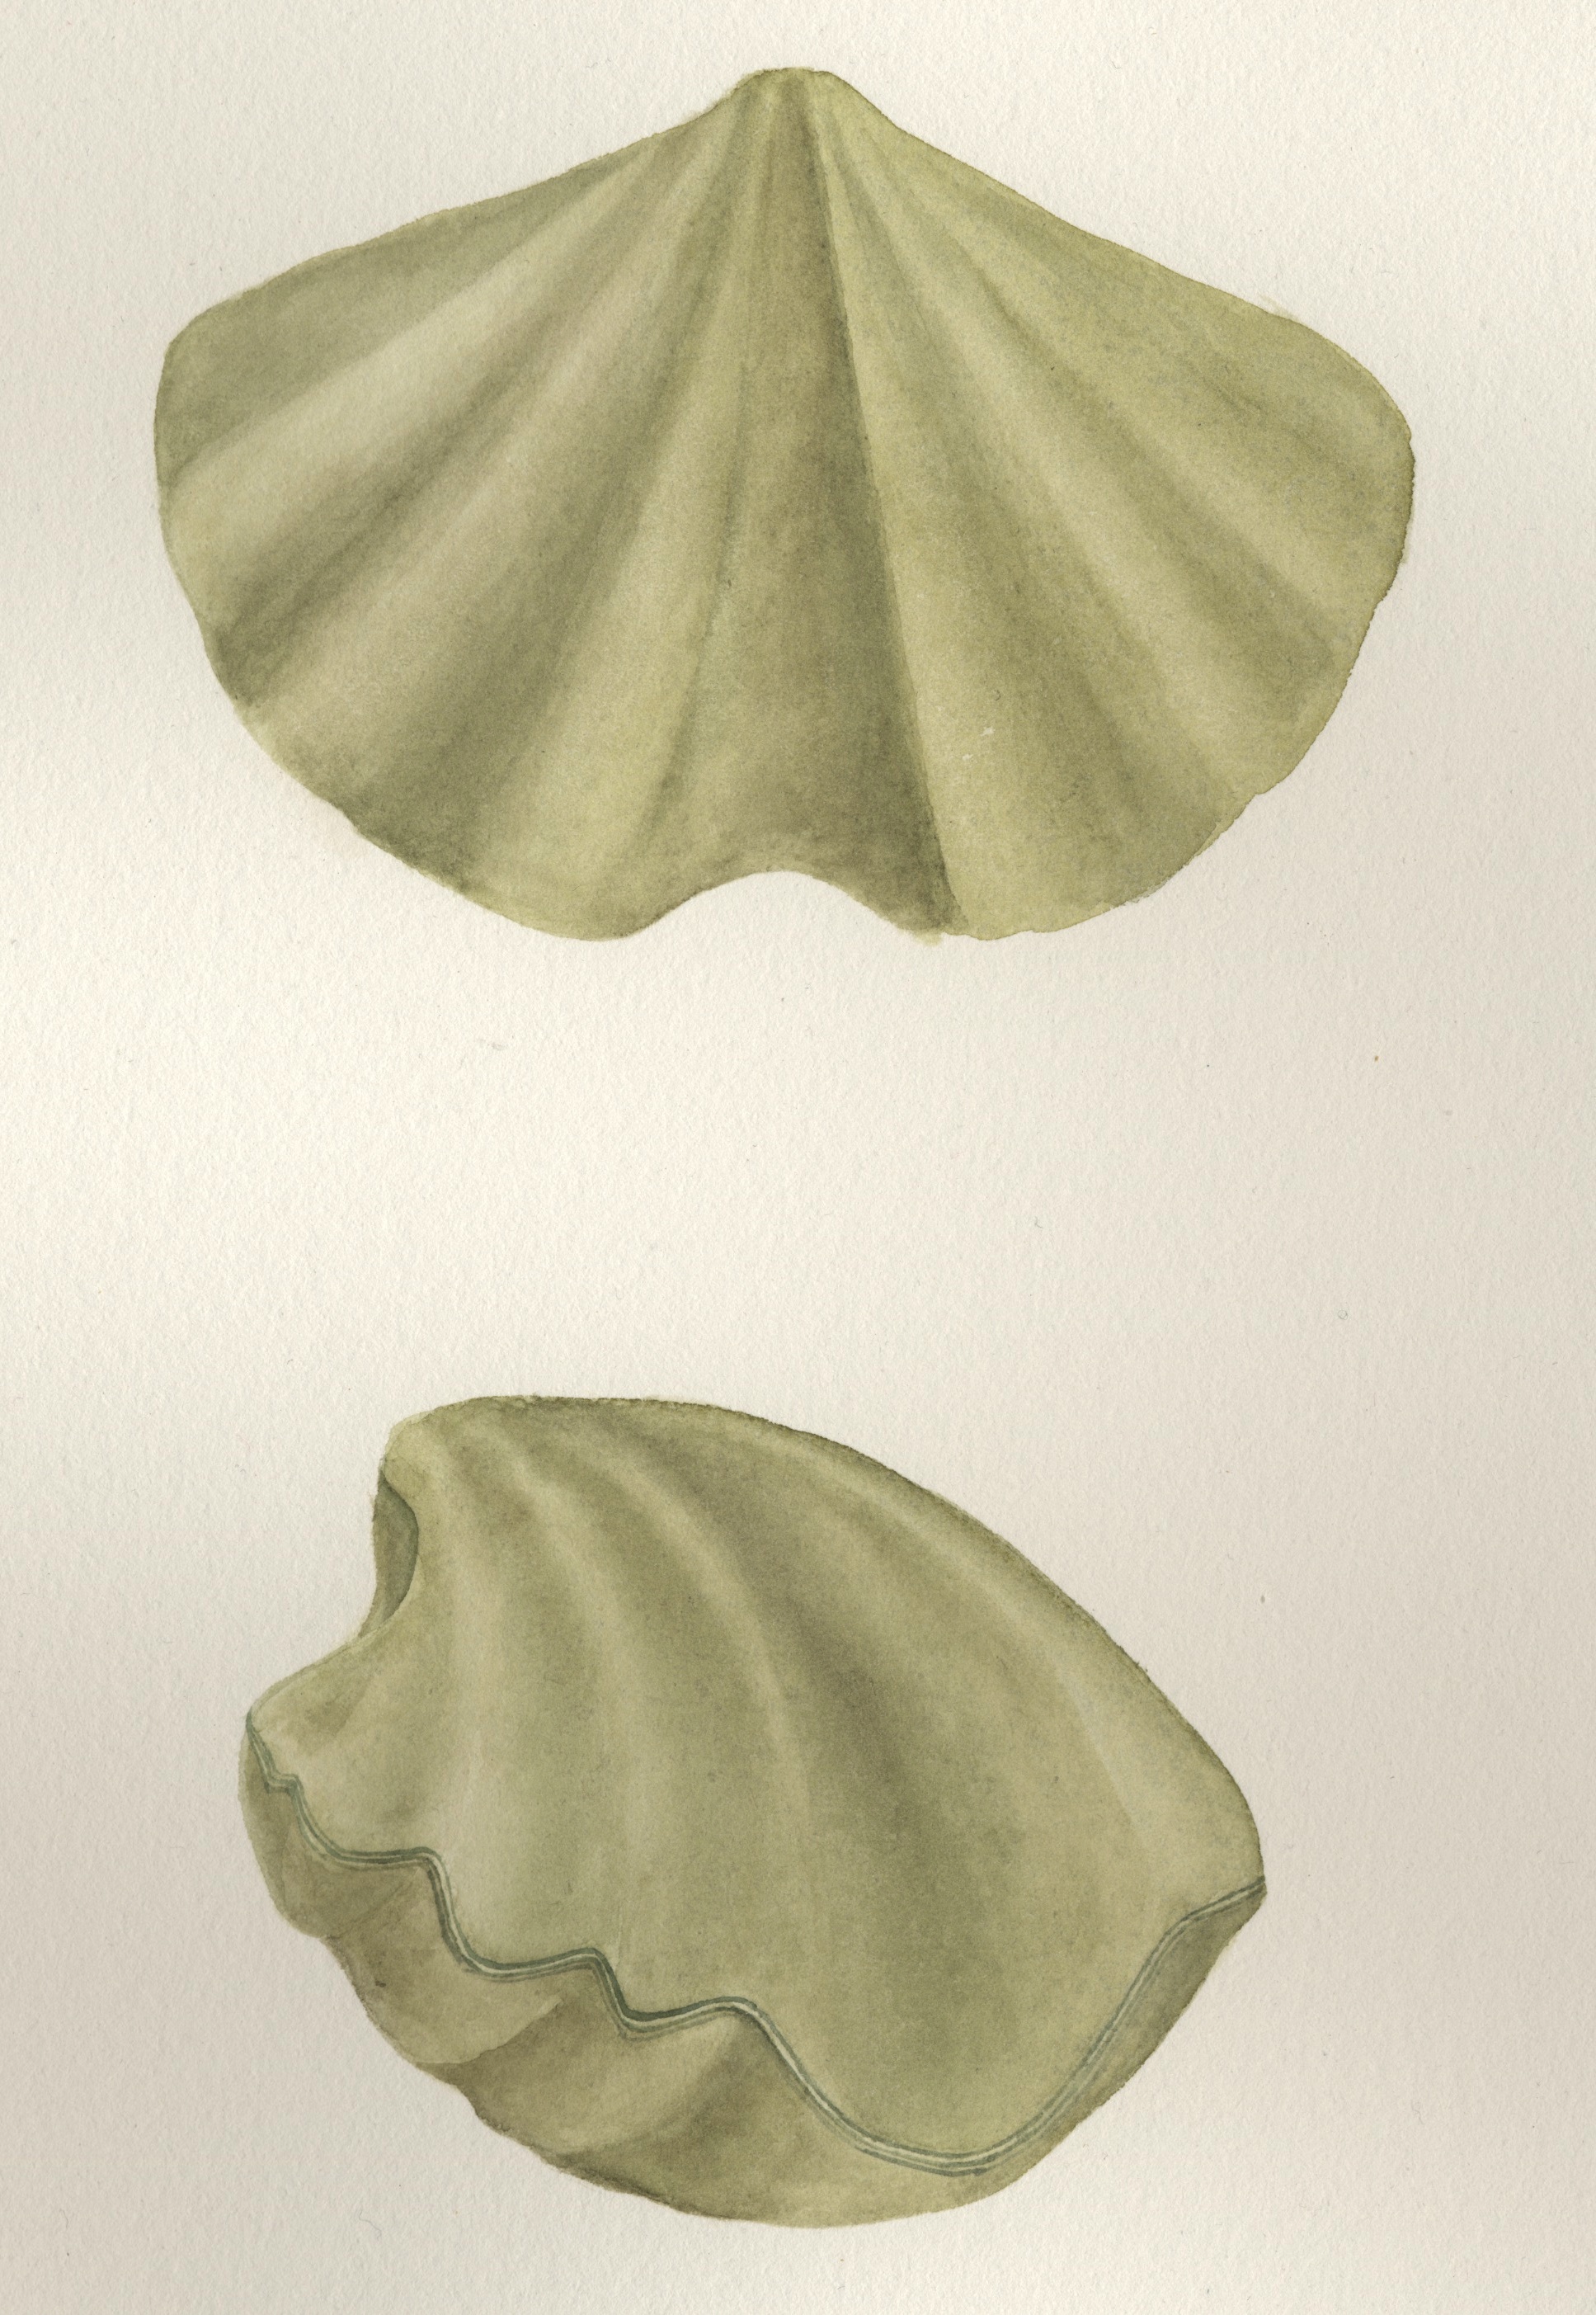 Scientific illustration by Monica Jurik of a Spiriferid brachiopod  based on Janius nobilis from Chicago and Wisconsin. Common Silurian level bottom community brachiopod from the Chicago - Milwaukee area. The illustration is a water color based on specimens in our collections.